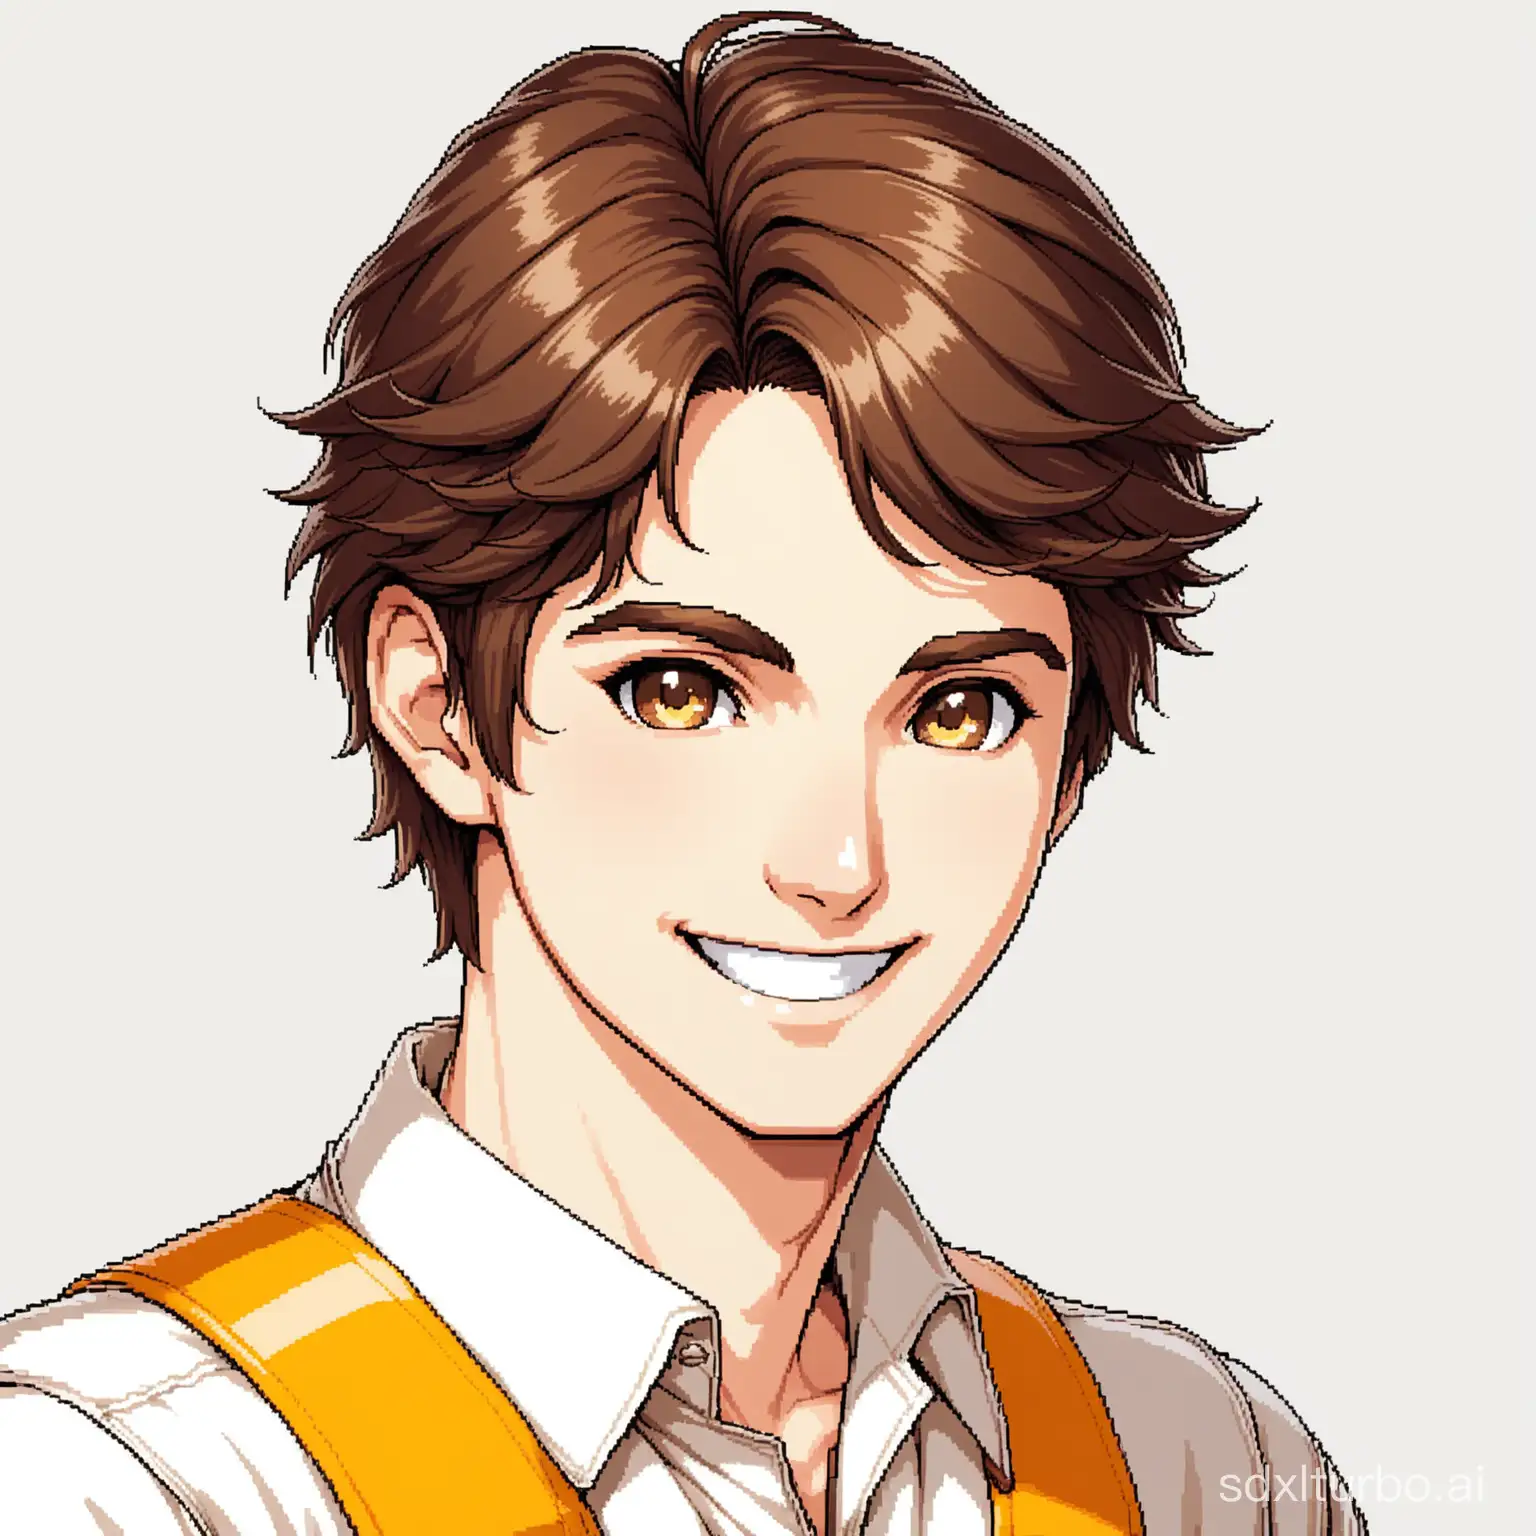 1980s Arcade Game Character. male, short brown hair, white skin, brown eyes, smiling. plain White background.